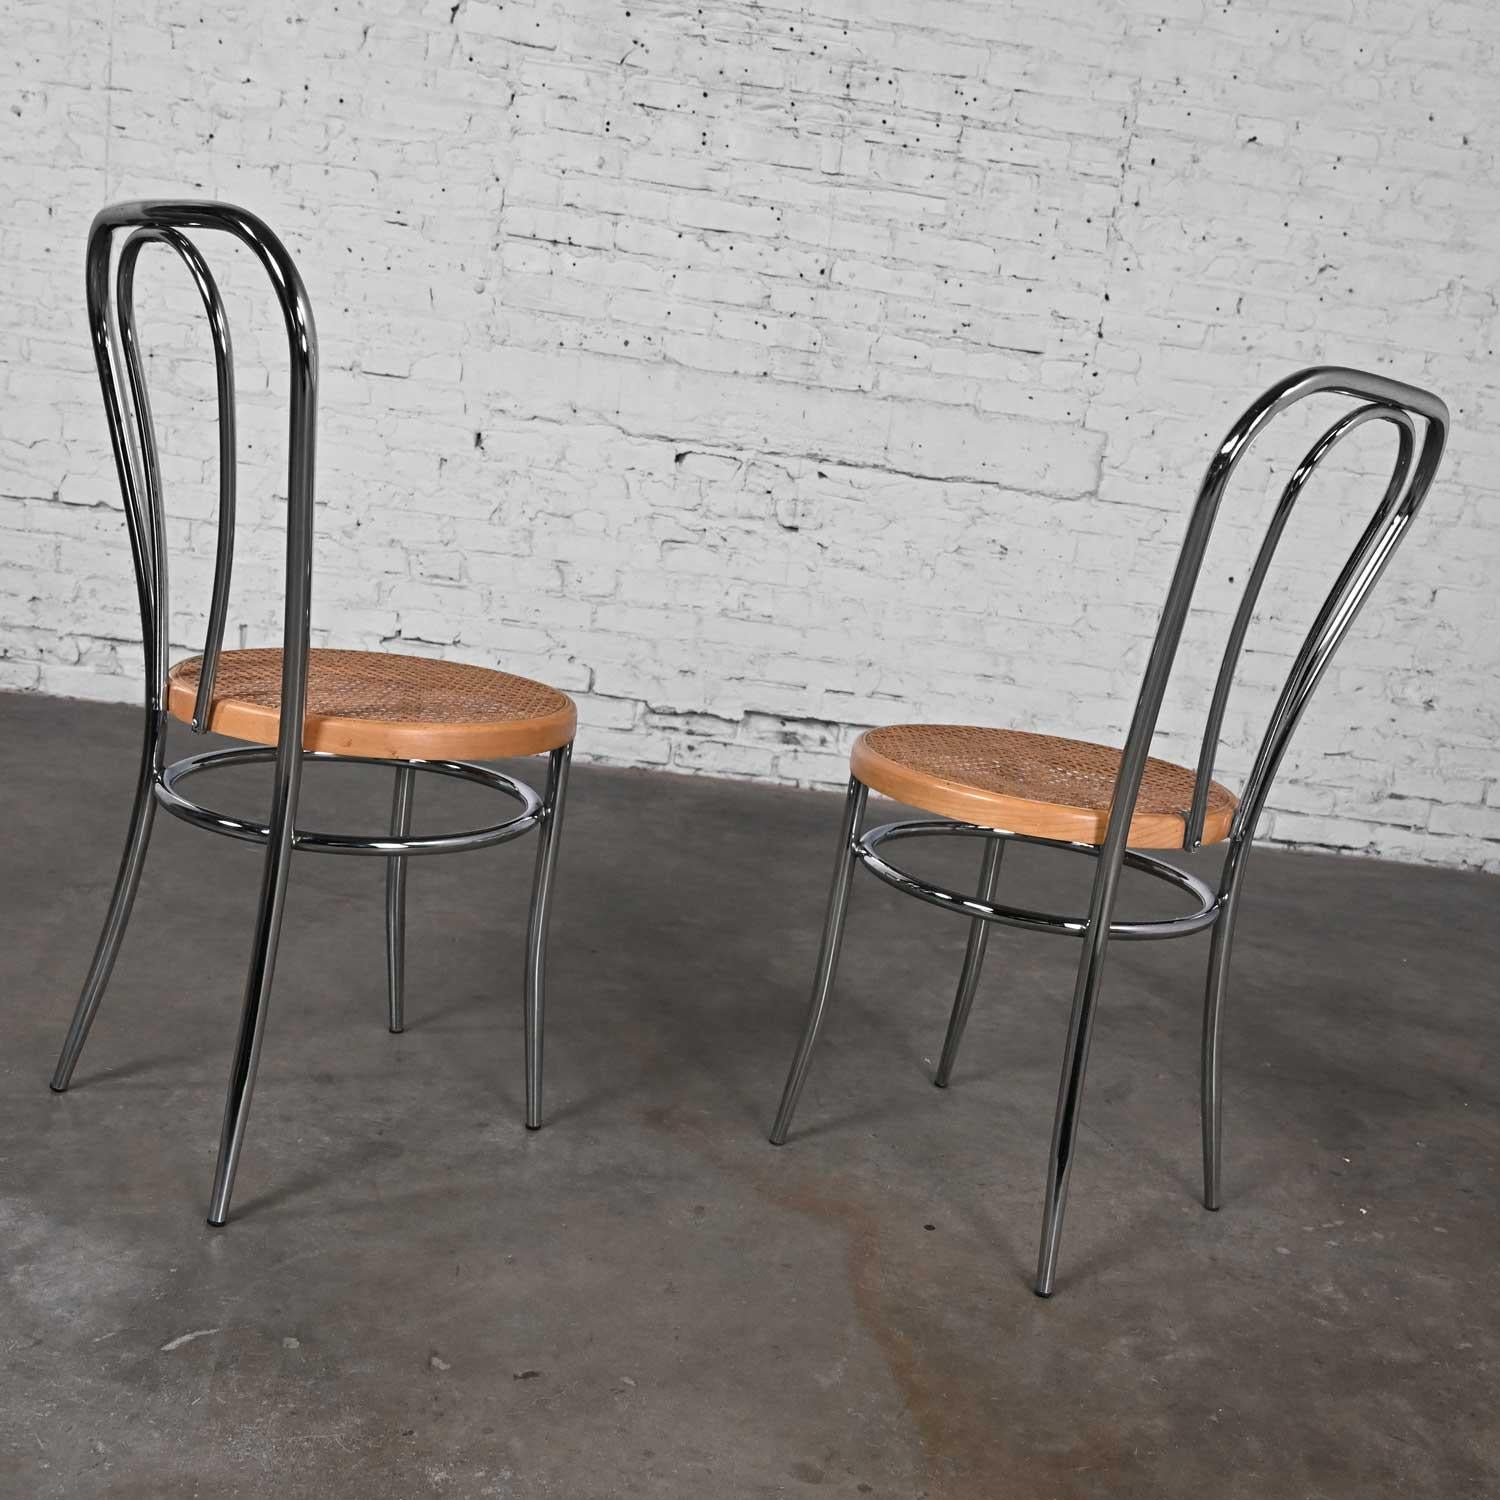 Pair Made Italy Bauhaus Style Bistro Café Chairs Chrome Cane Seat After Thonet For Sale 3